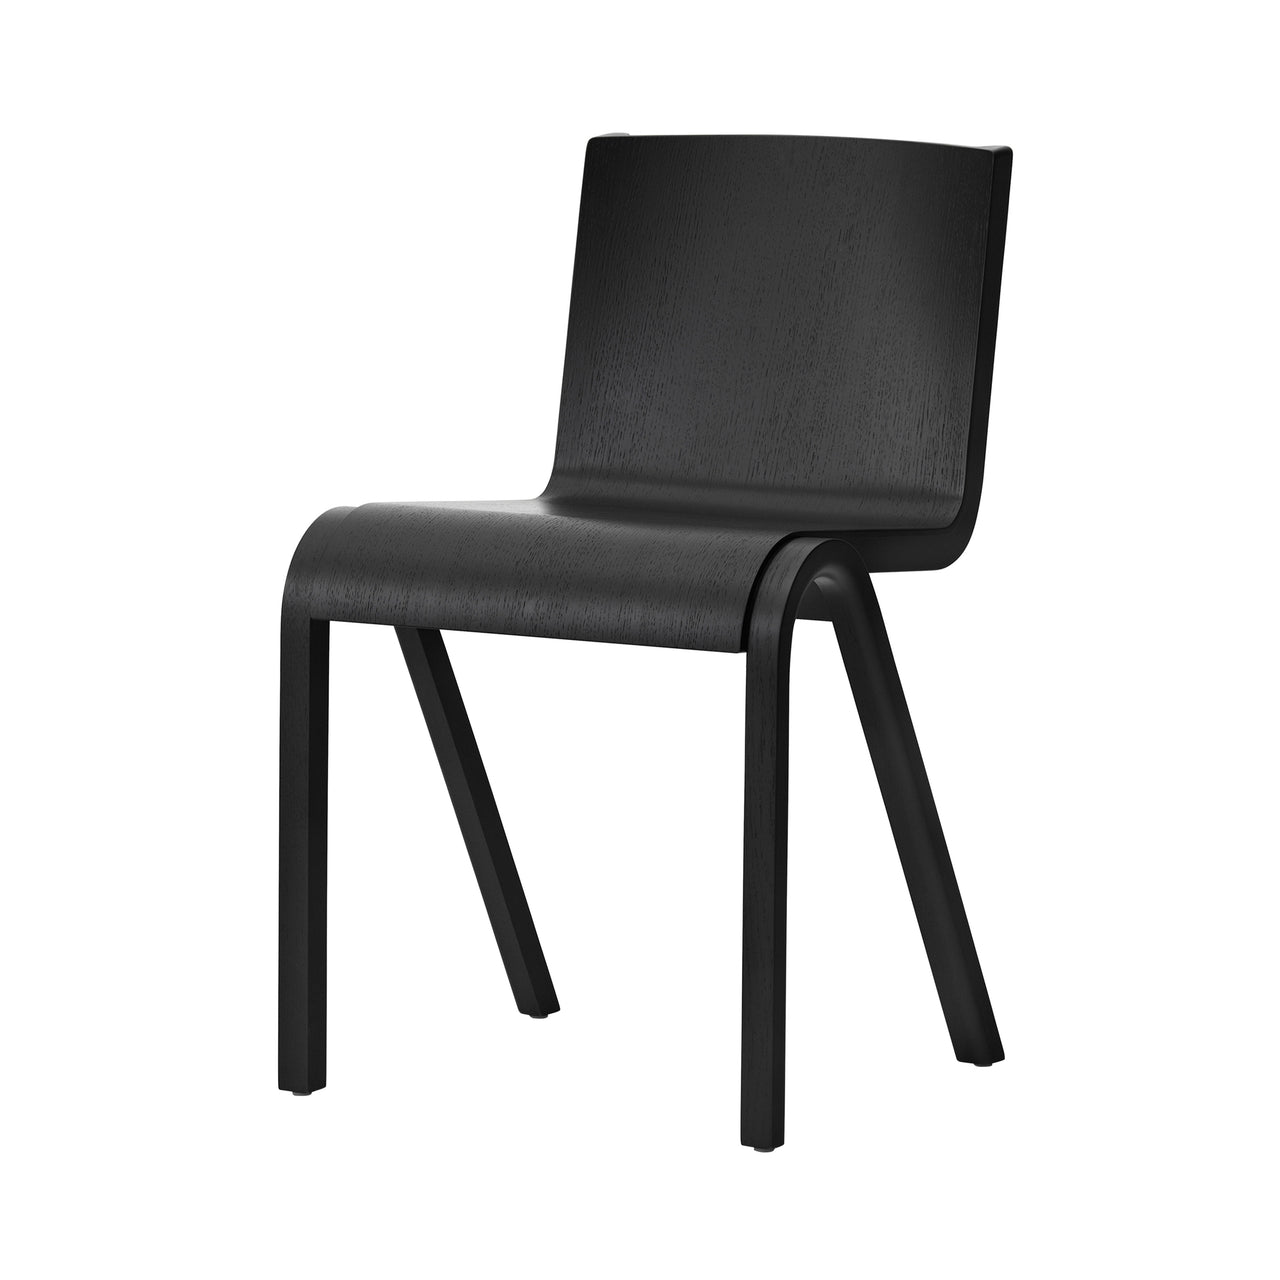 Ready Dining Chair: Stacking + Black Painted Oak